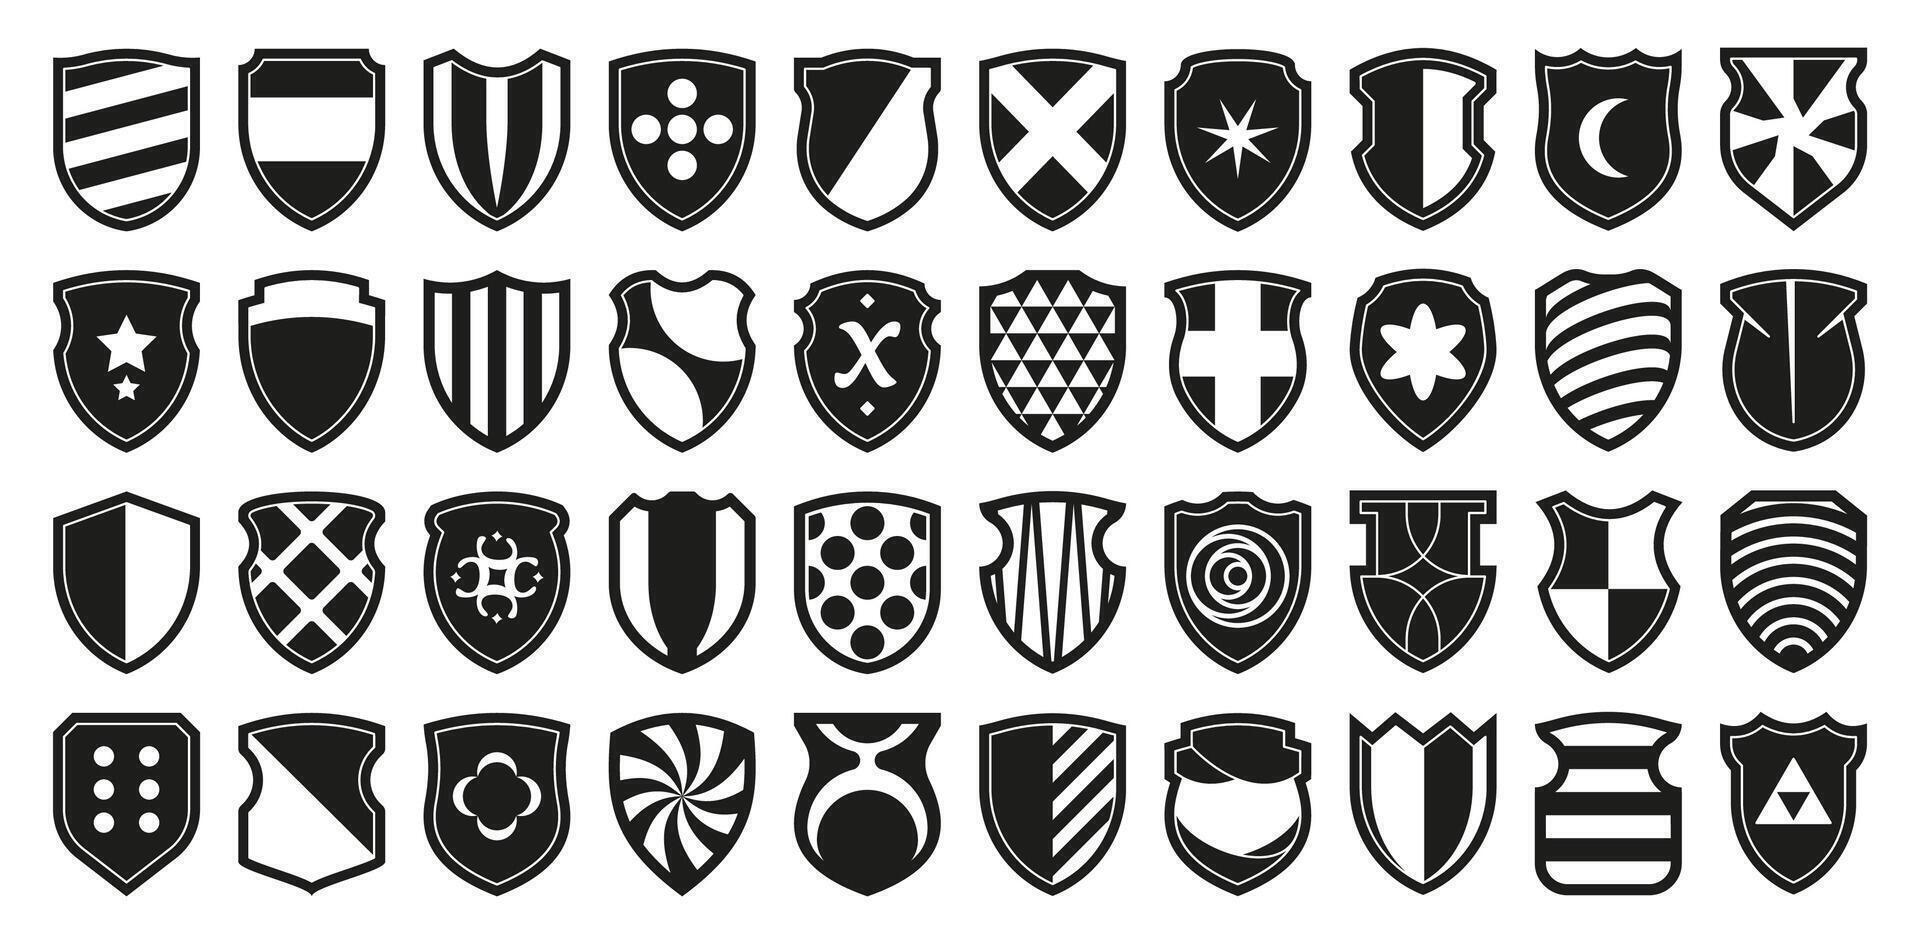 Heraldic shields logo. Army security and military badge icons, game clans and royal army individual symbol, protection concept. Vector certificate and award icon set